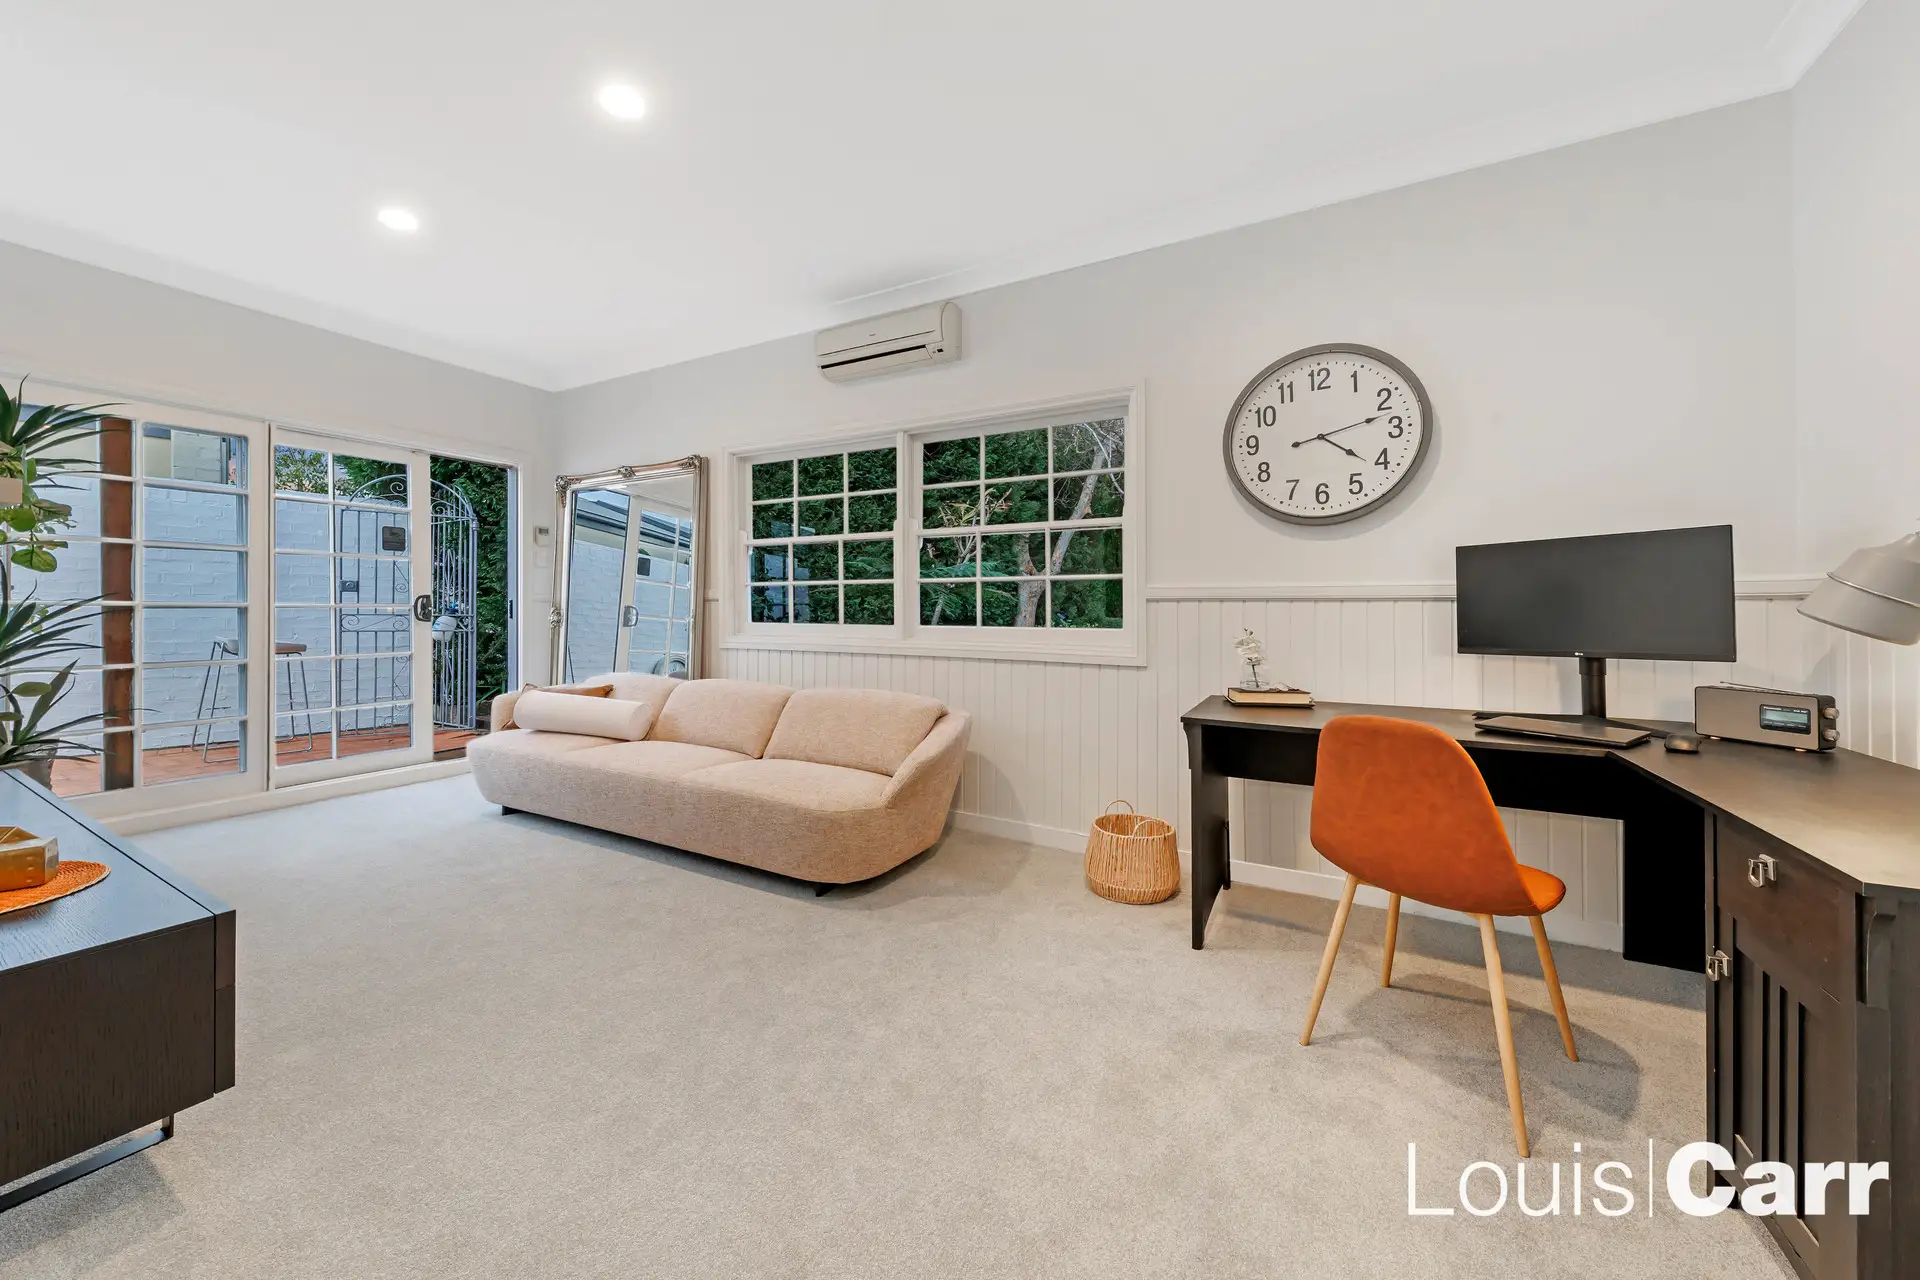 Photo #9: 9 Araluen Place, Glenhaven - Sold by Louis Carr Real Estate